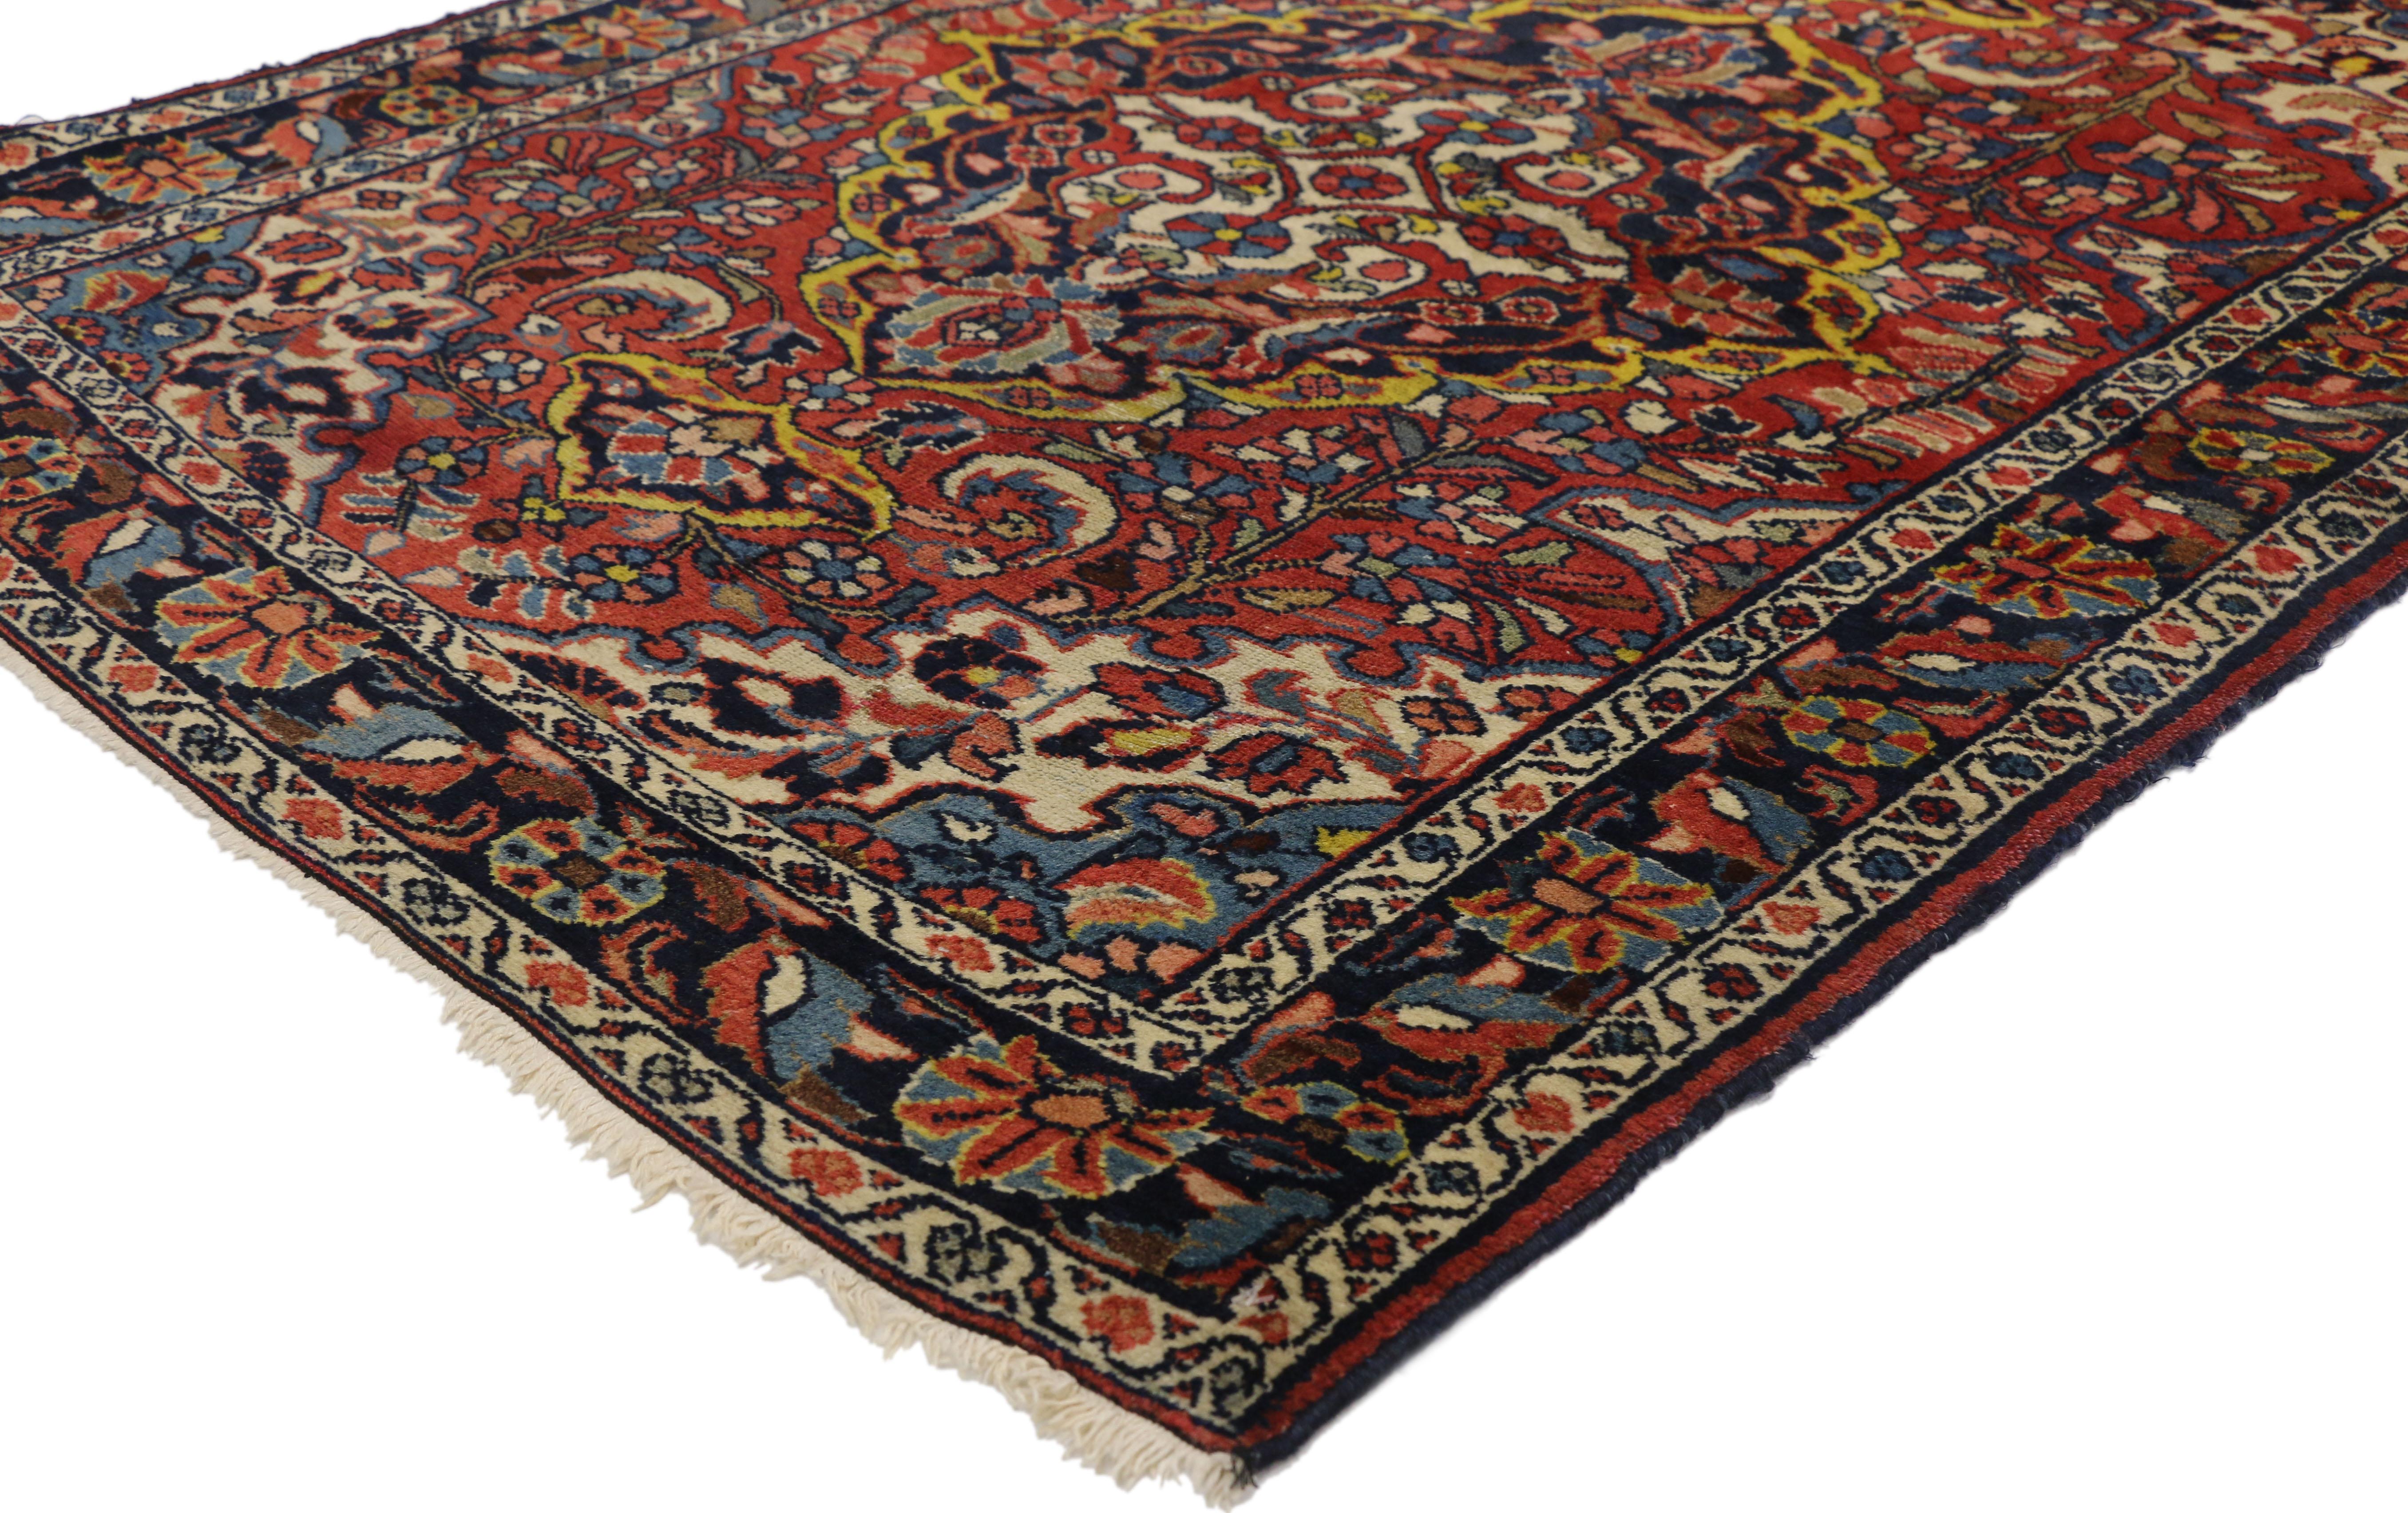 72852 Antique Persian Lilihan Rug with Central Floral Bouquet Medallion. Richness in color, texture and visual opulence, this antique Persian Lilihan  rug with Victorian style features an all-over floral pattern. The hues of the central medallion